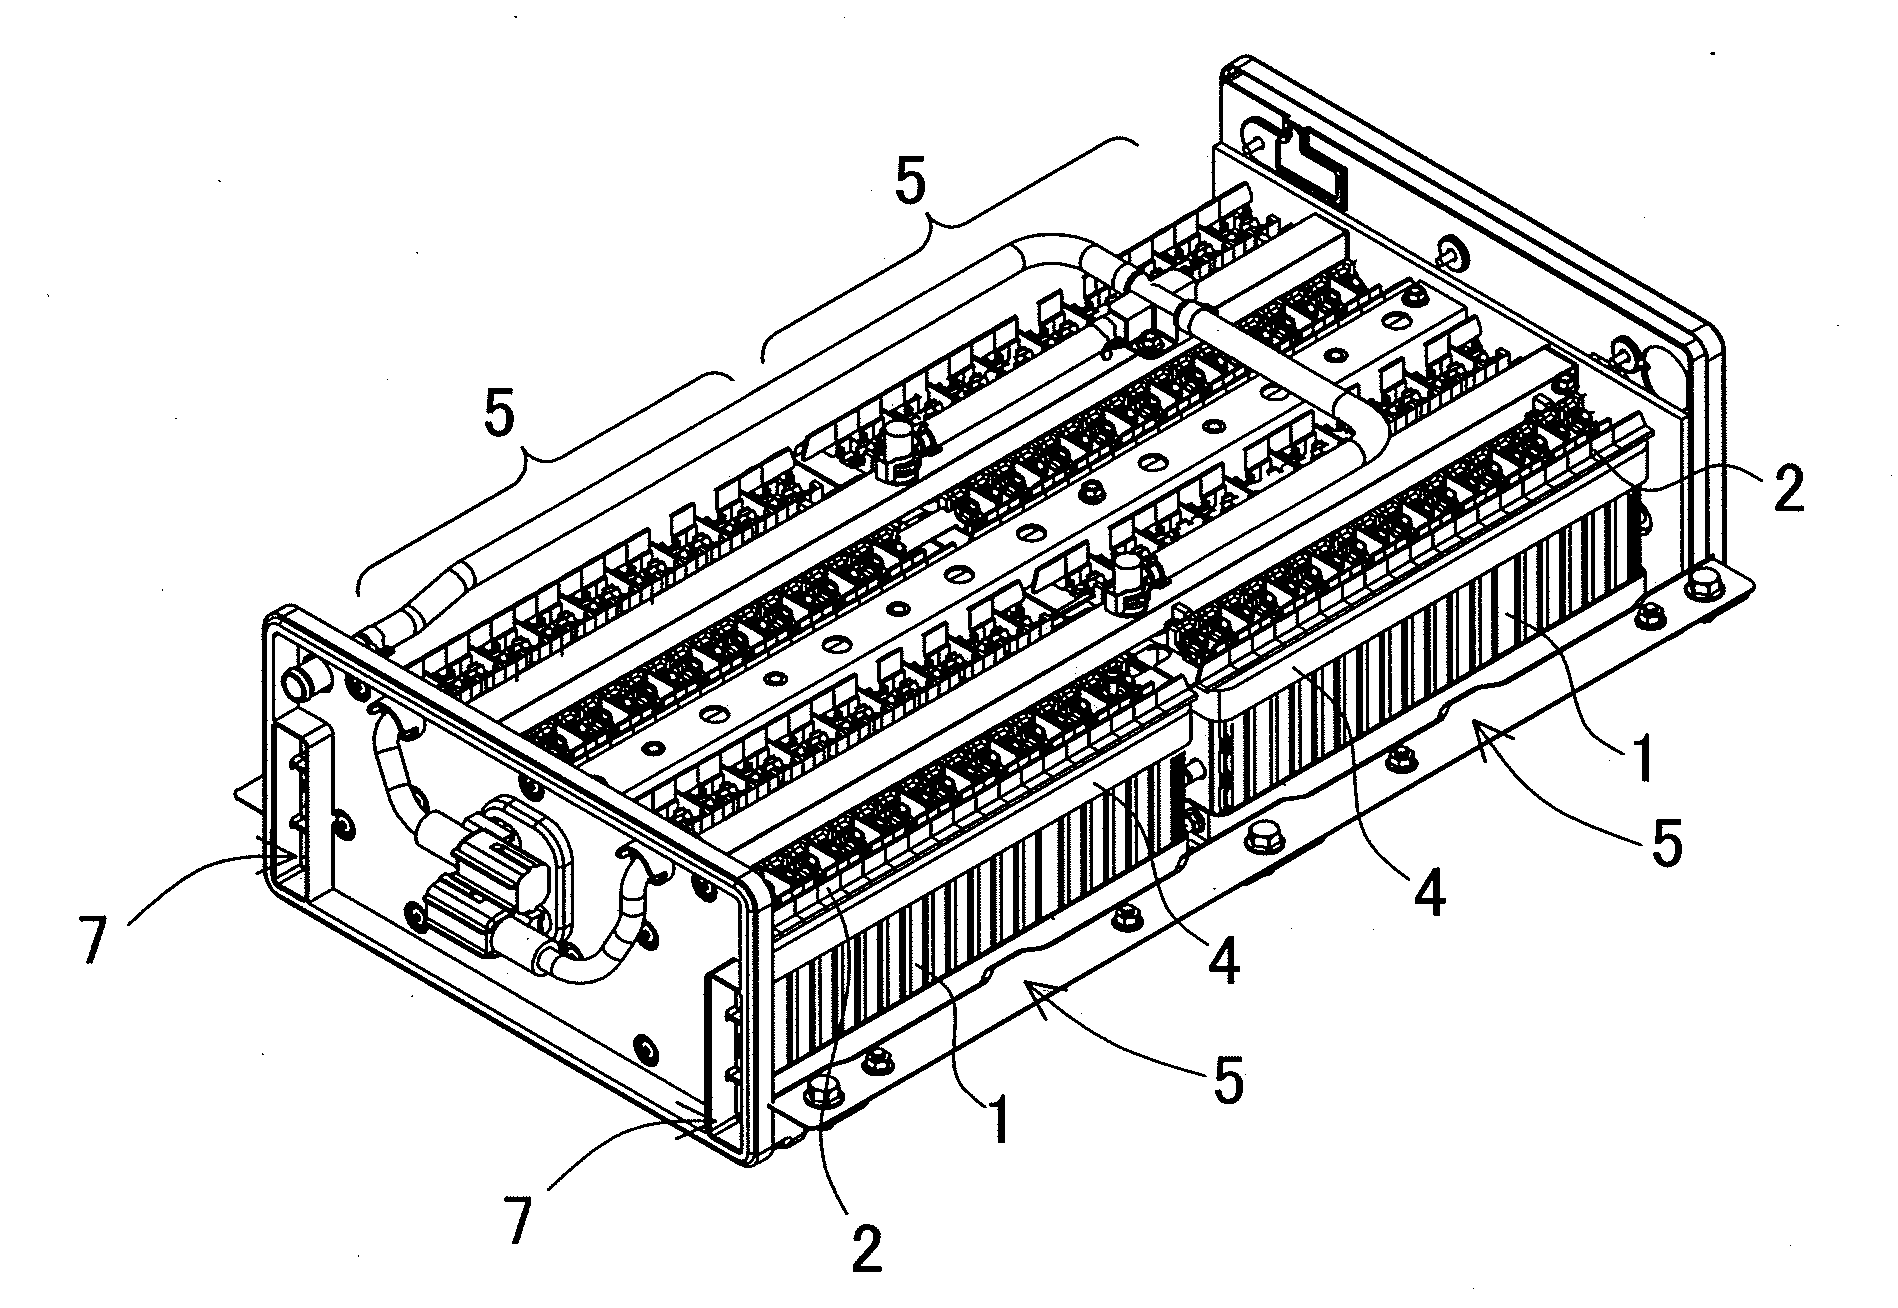 Battery array configured to prevent vibration